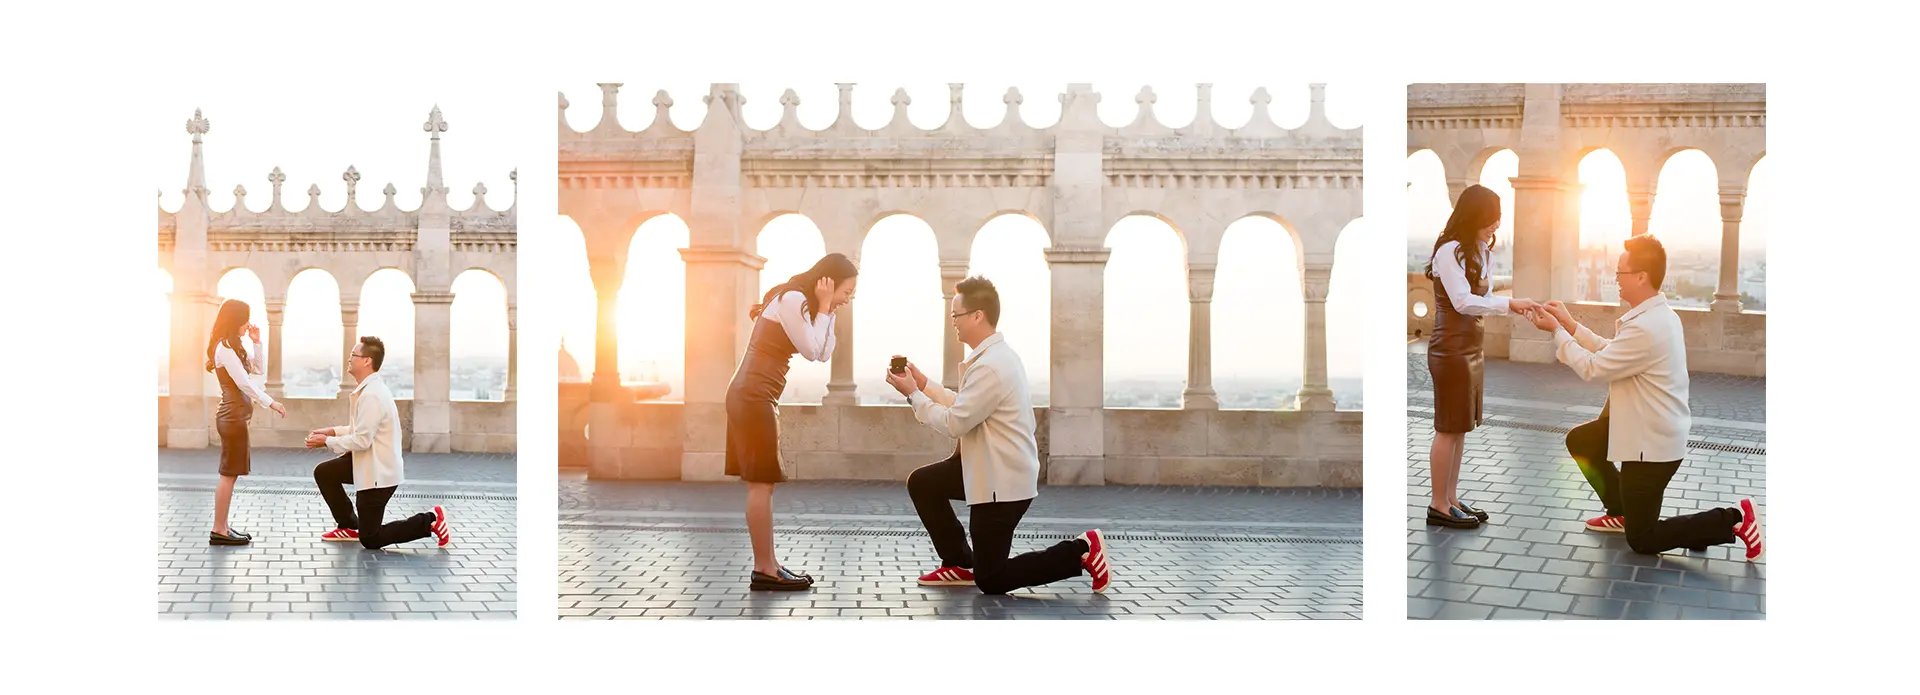 Proposal in Budapest (Fisherman's Bastion